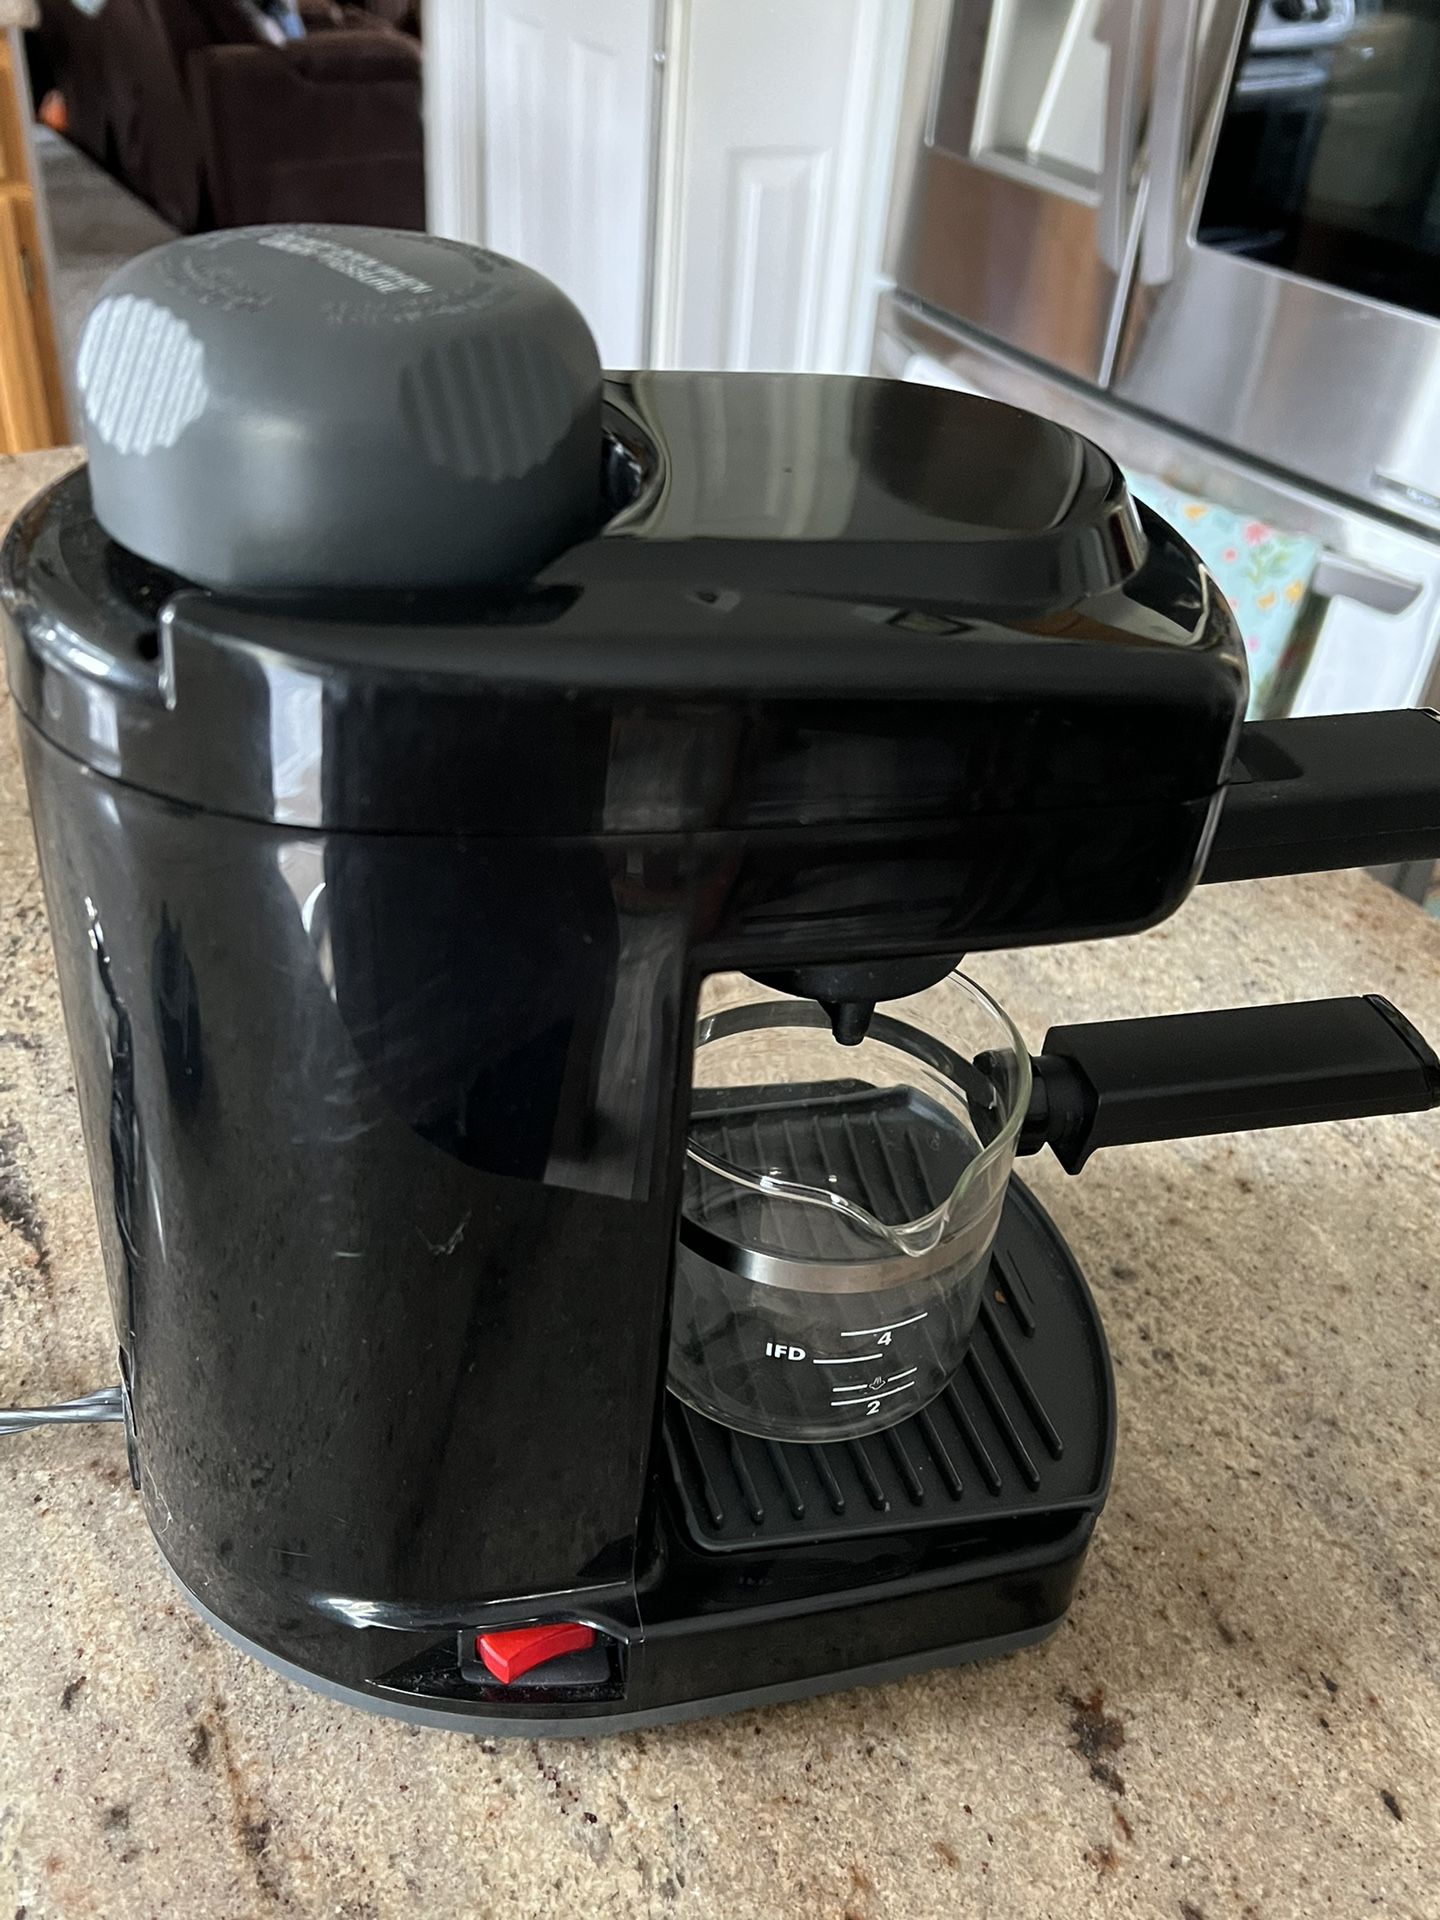 DeLonghi 60-Cup Coffee Maker for Sale in Stowe, VT - OfferUp